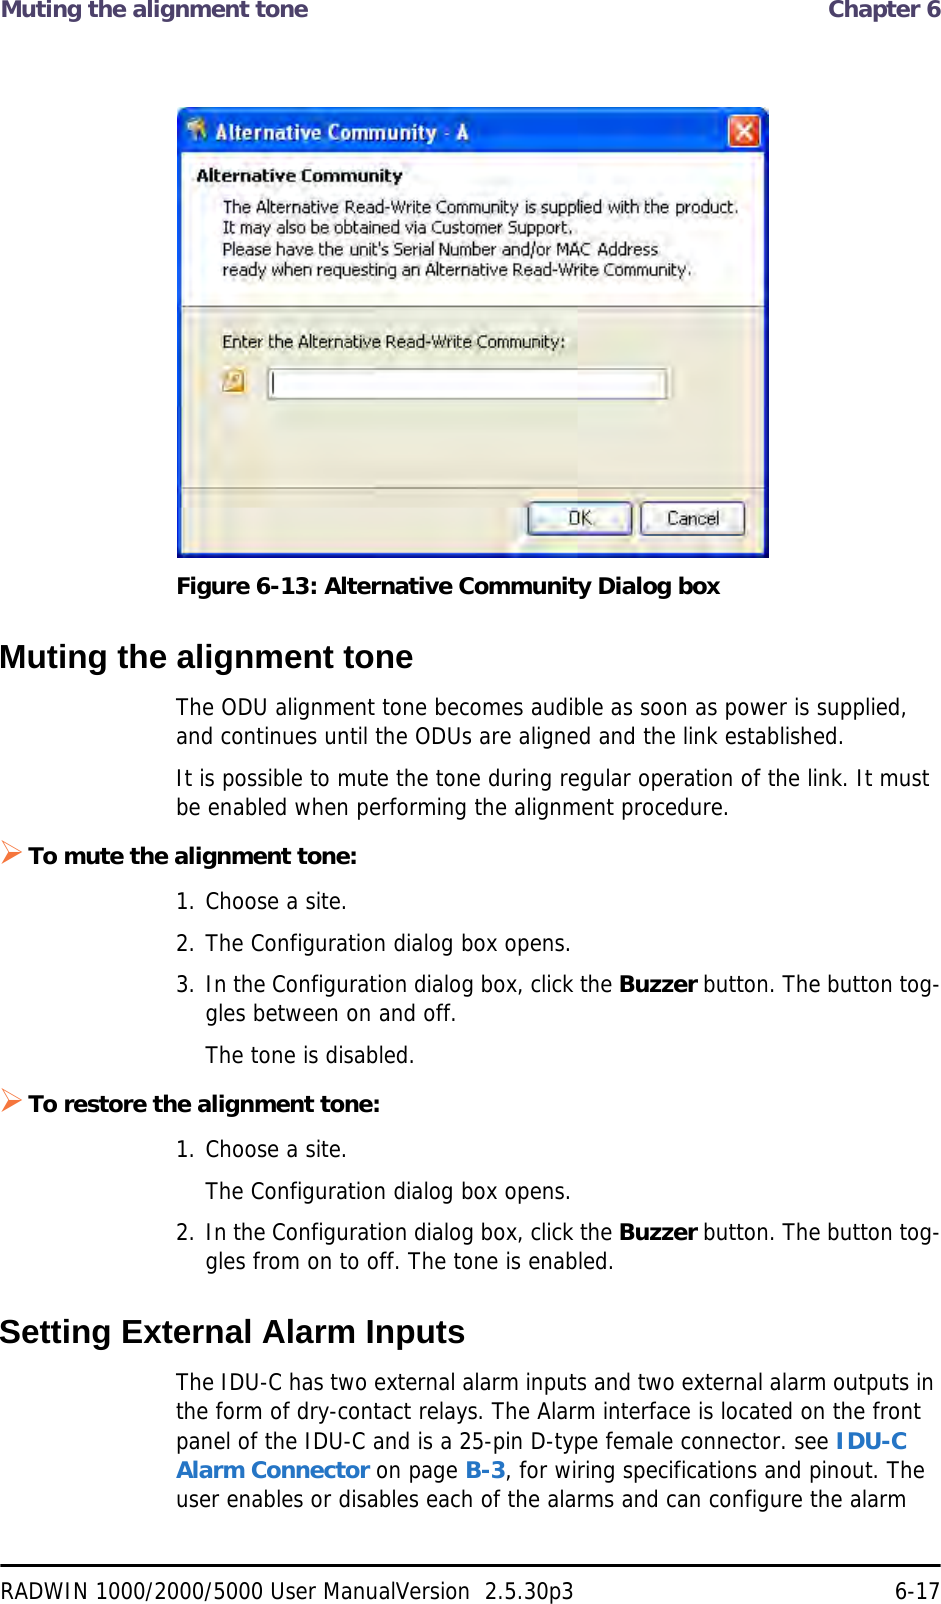 Muting the alignment tone  Chapter 6RADWIN 1000/2000/5000 User ManualVersion  2.5.30p3 6-17Figure 6-13: Alternative Community Dialog boxMuting the alignment toneThe ODU alignment tone becomes audible as soon as power is supplied, and continues until the ODUs are aligned and the link established.It is possible to mute the tone during regular operation of the link. It must be enabled when performing the alignment procedure.To mute the alignment tone:1. Choose a site.2. The Configuration dialog box opens.3. In the Configuration dialog box, click the Buzzer button. The button tog-gles between on and off.The tone is disabled.To restore the alignment tone:1. Choose a site.The Configuration dialog box opens.2. In the Configuration dialog box, click the Buzzer button. The button tog-gles from on to off. The tone is enabled.Setting External Alarm InputsThe IDU-C has two external alarm inputs and two external alarm outputs in the form of dry-contact relays. The Alarm interface is located on the front panel of the IDU-C and is a 25-pin D-type female connector. see IDU-C Alarm Connector on page B-3, for wiring specifications and pinout. The user enables or disables each of the alarms and can configure the alarm 